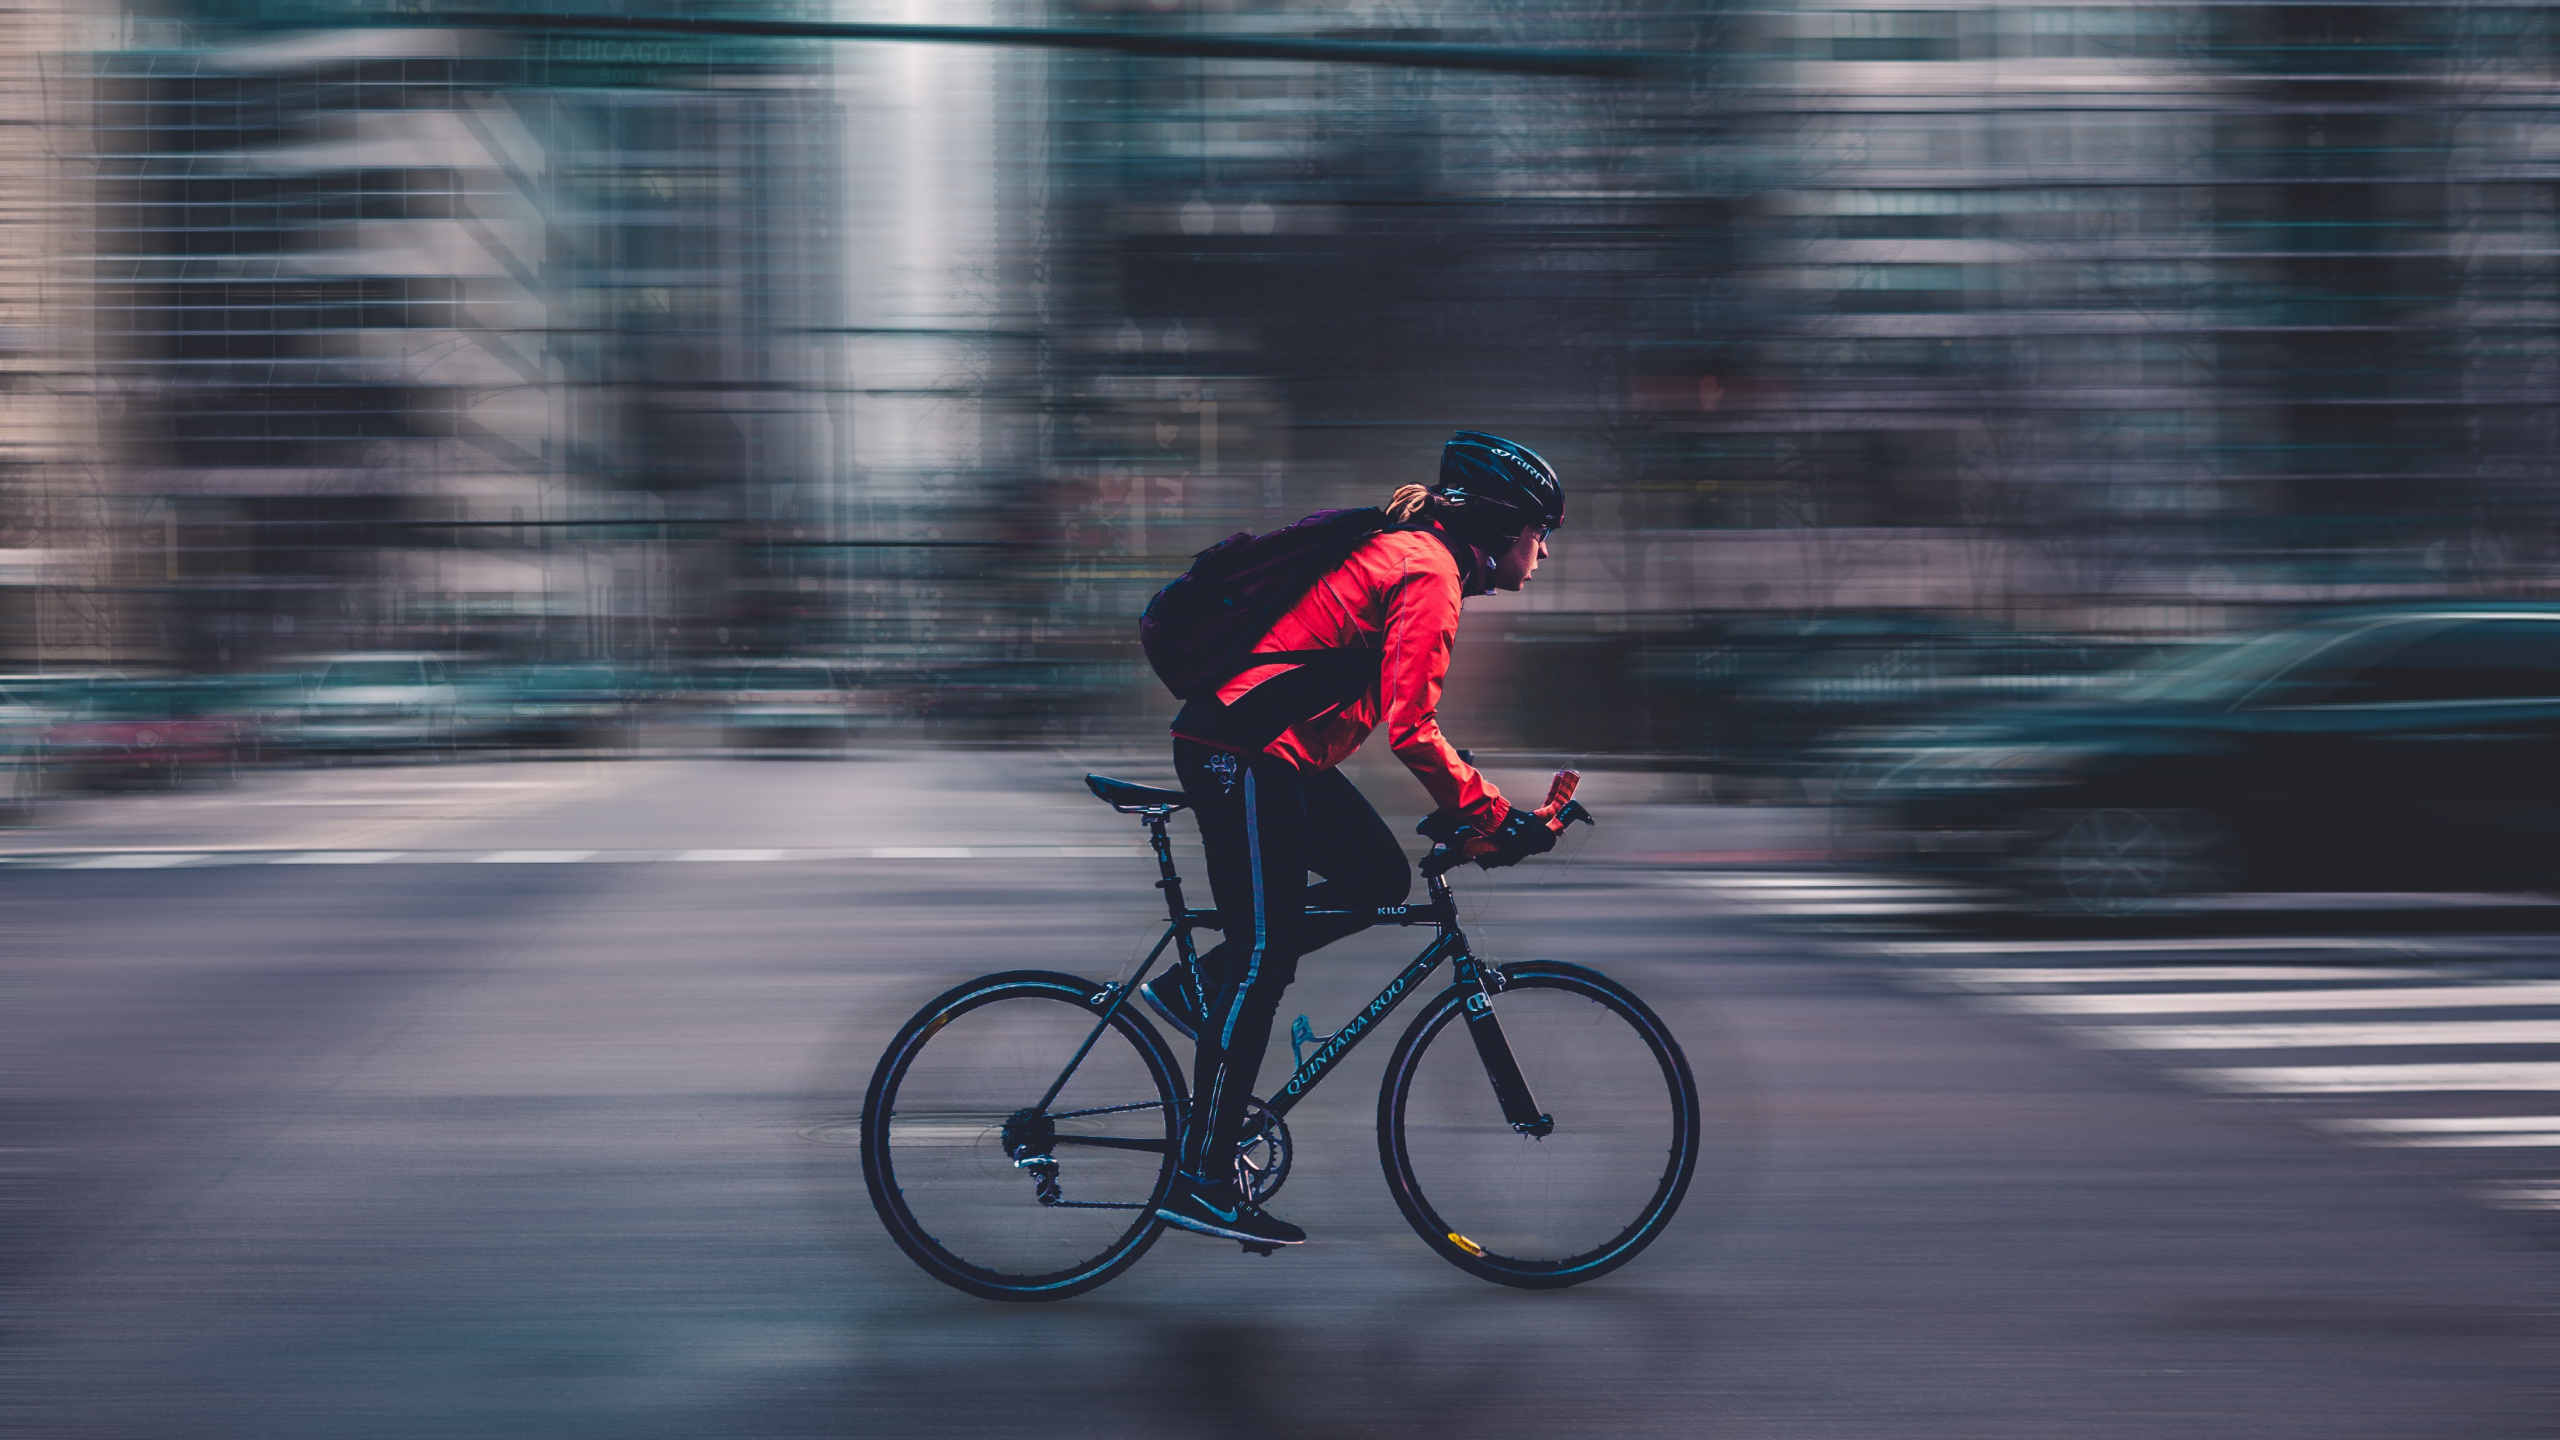 Man in Red Jacket Riding Bicycle on Road During Daytime. Wallpaper in 2560x1440 Resolution